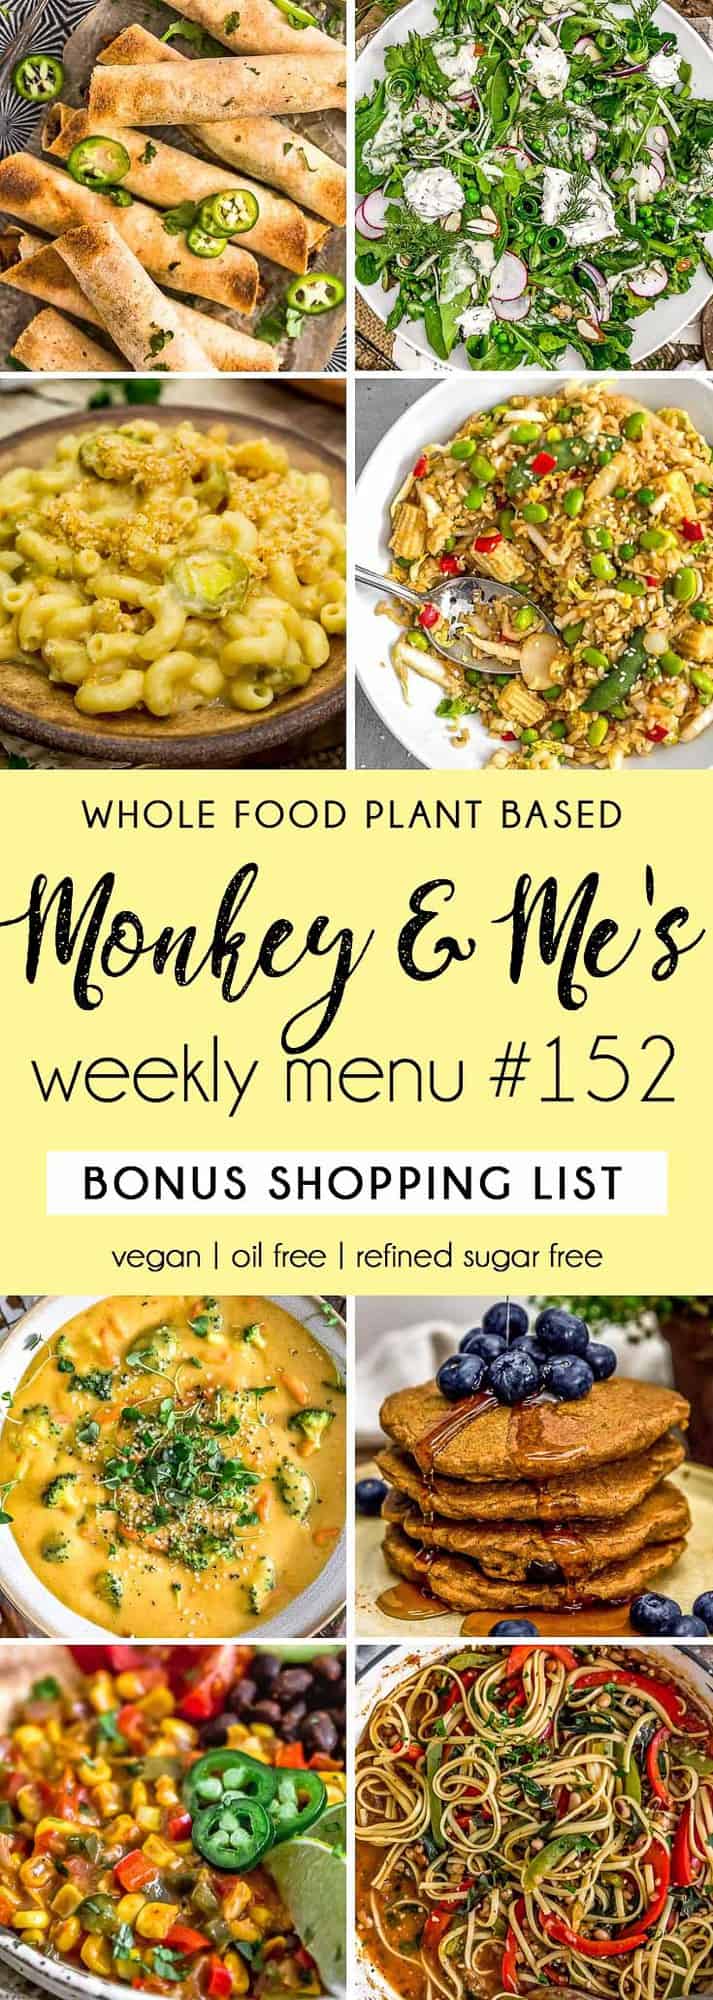 Monkey and Me's Menu 152 featuring 8 recipes